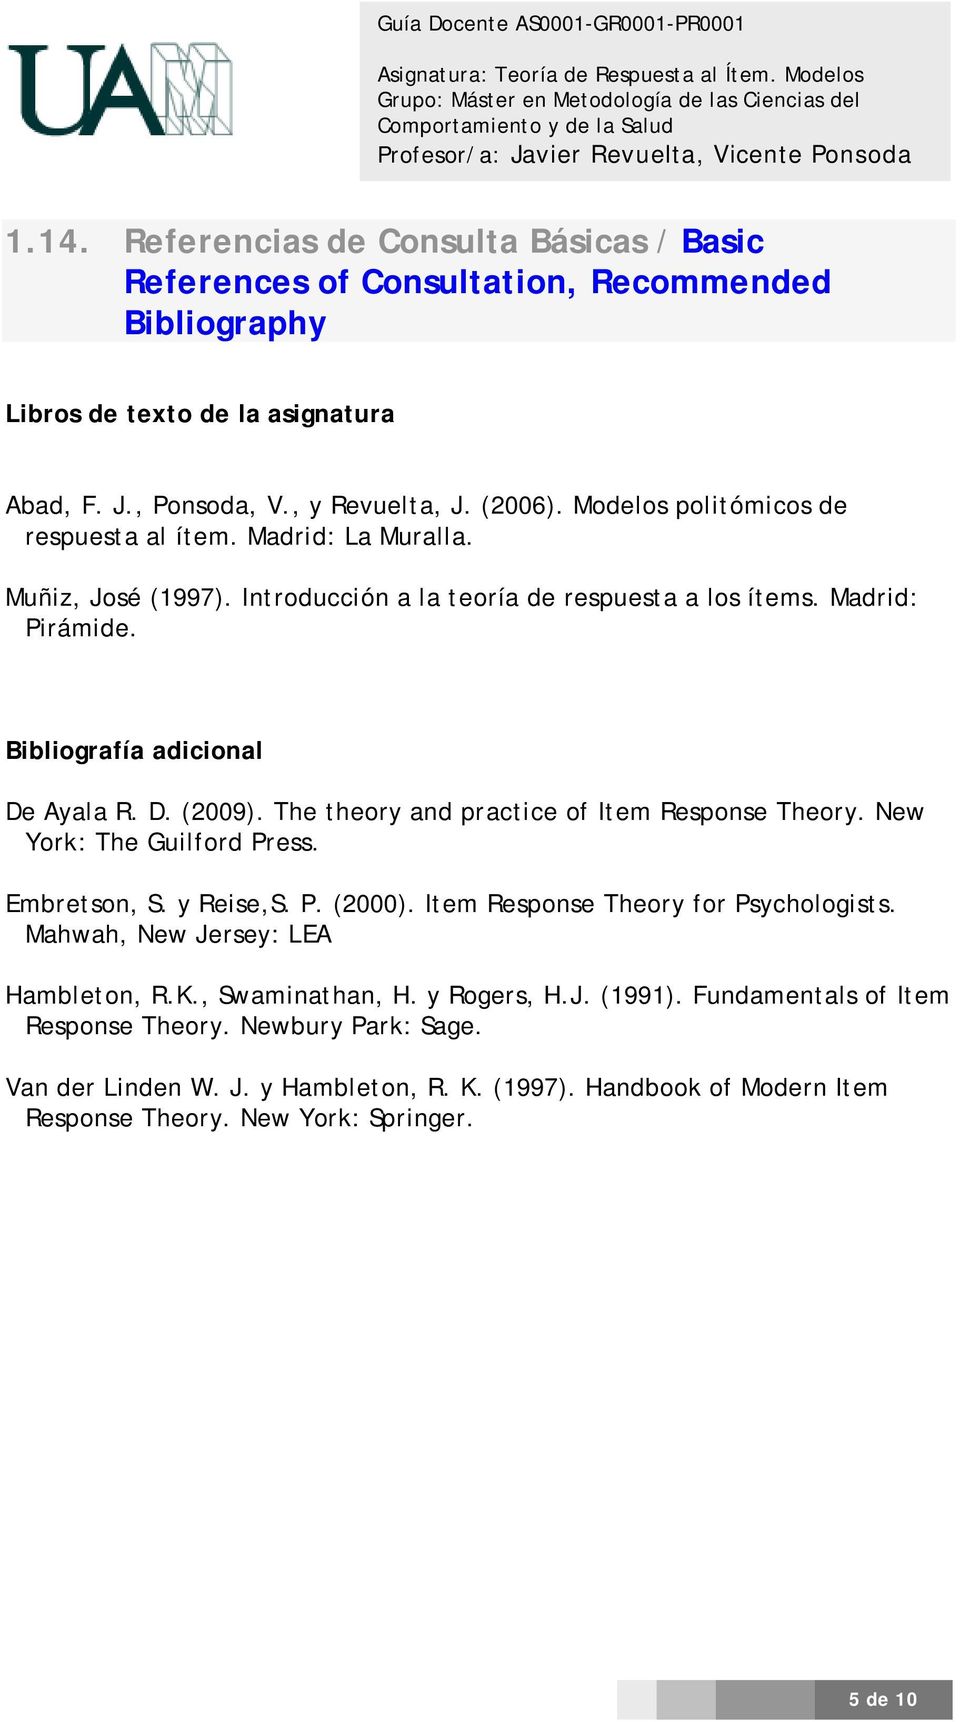 The theory and practice of Item Response Theory. New York: The Guilford Press. Embretson, S. y Reise,S. P. (2000). Item Response Theory for Psychologists. Mahwah, New Jersey: LEA Hambleton, R.K.